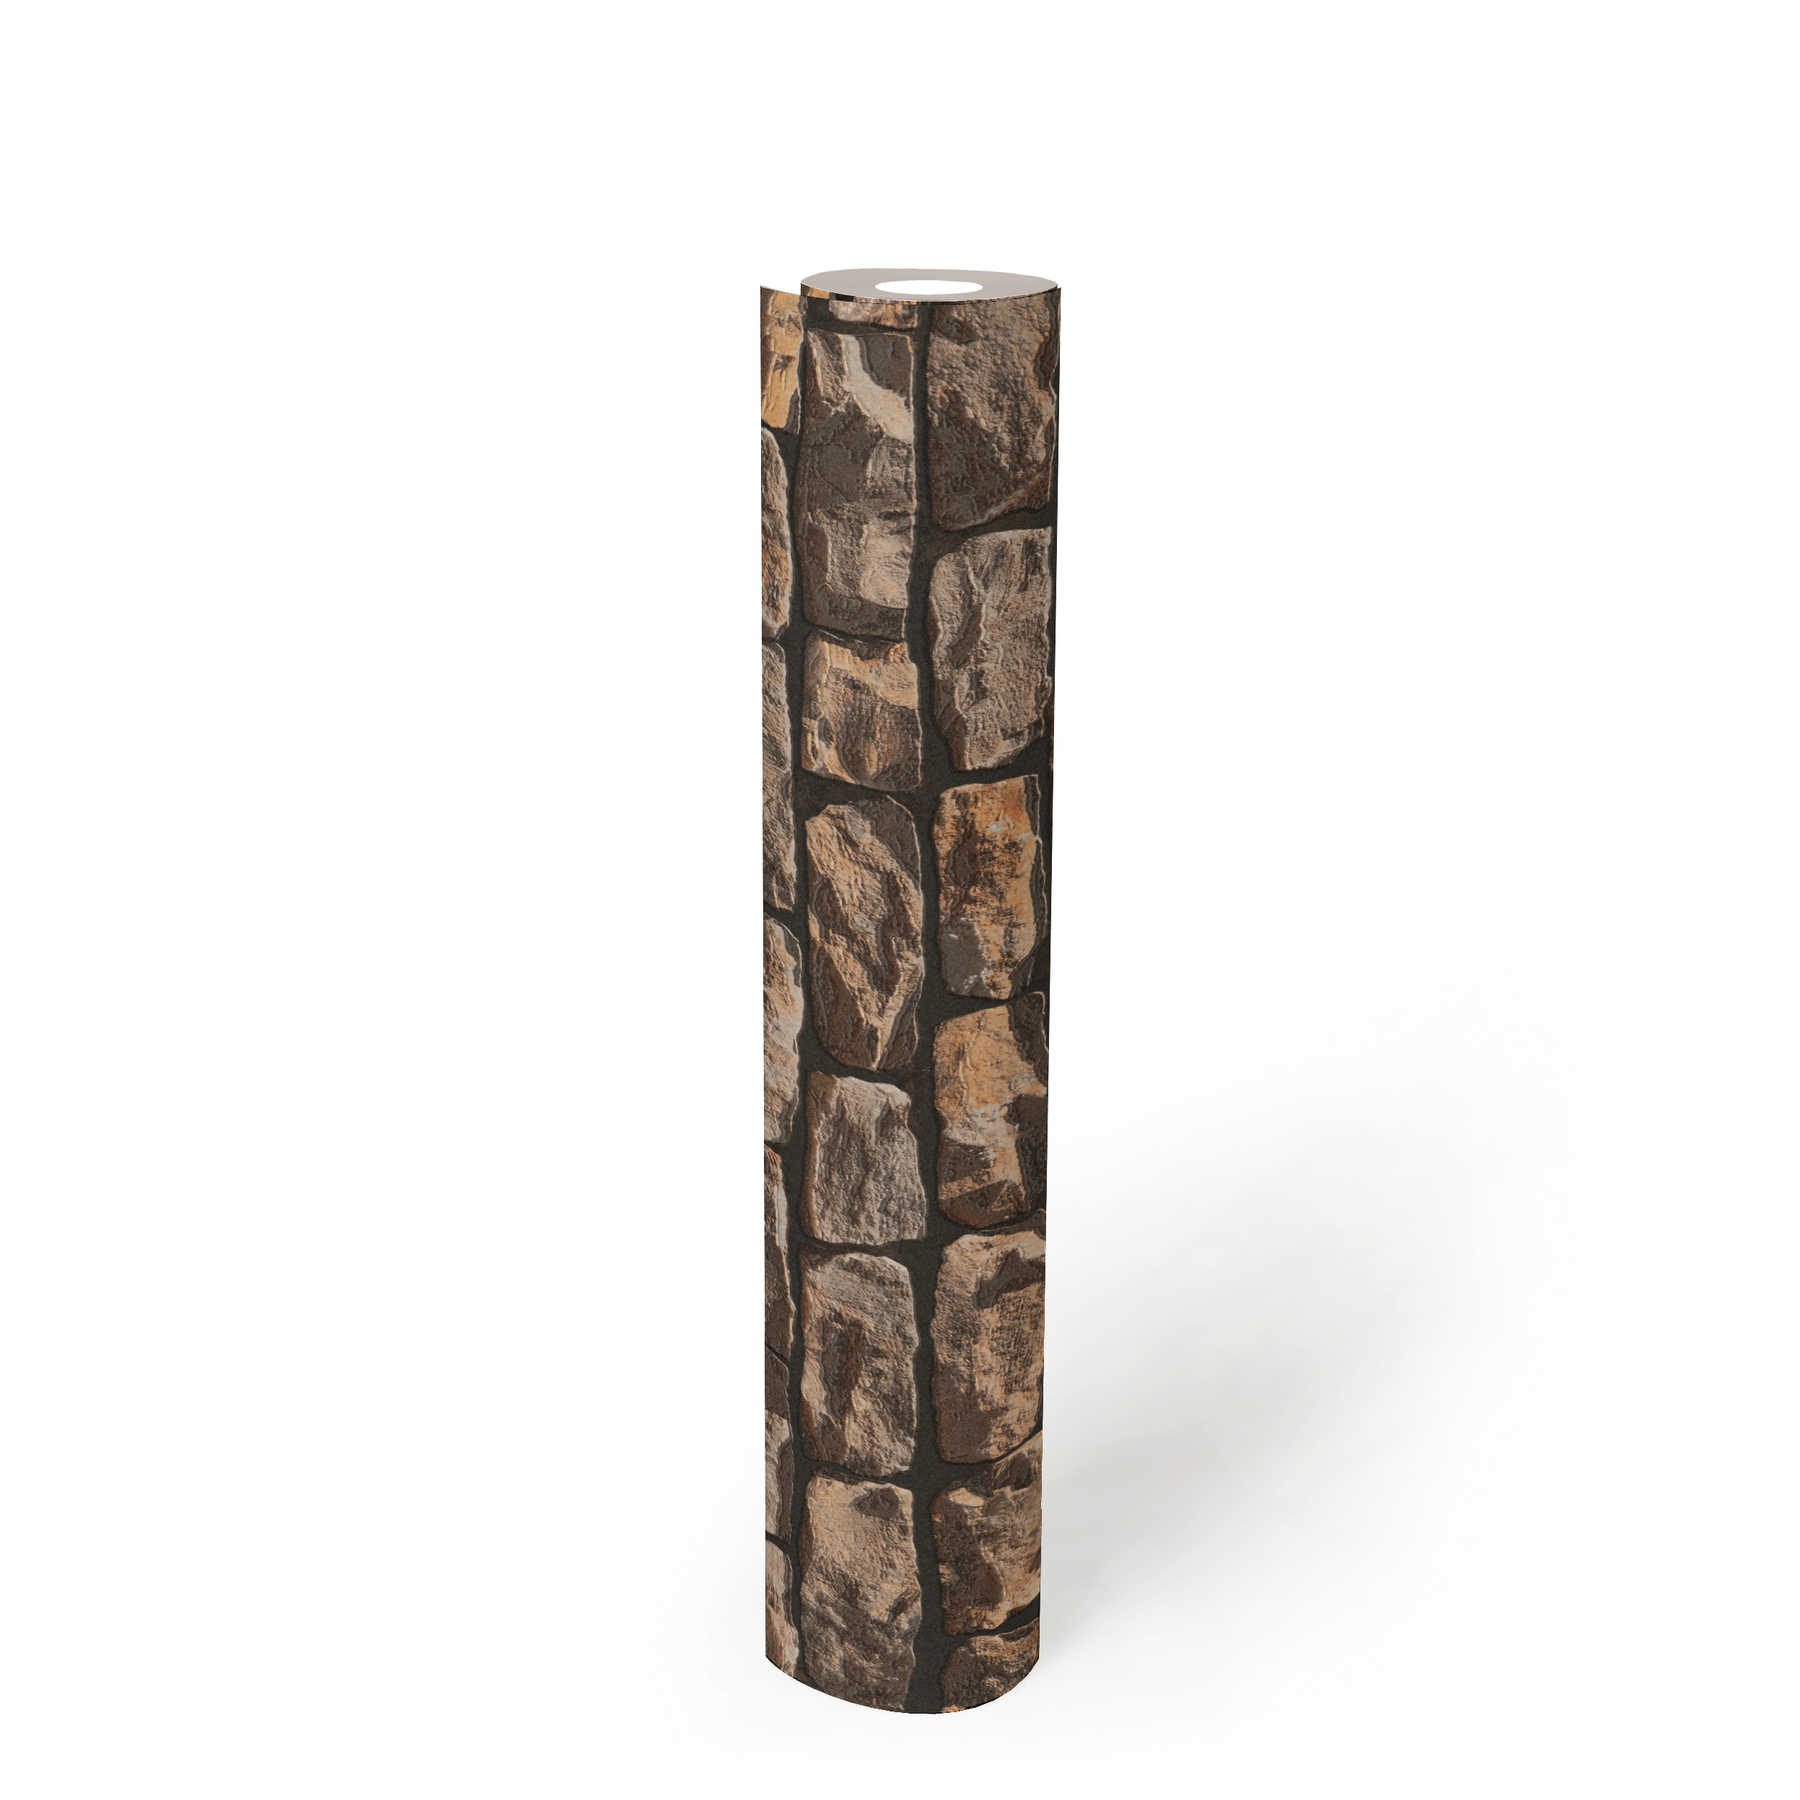             Masonry wallpaper with realistic natural stones - brown, beige, black
        